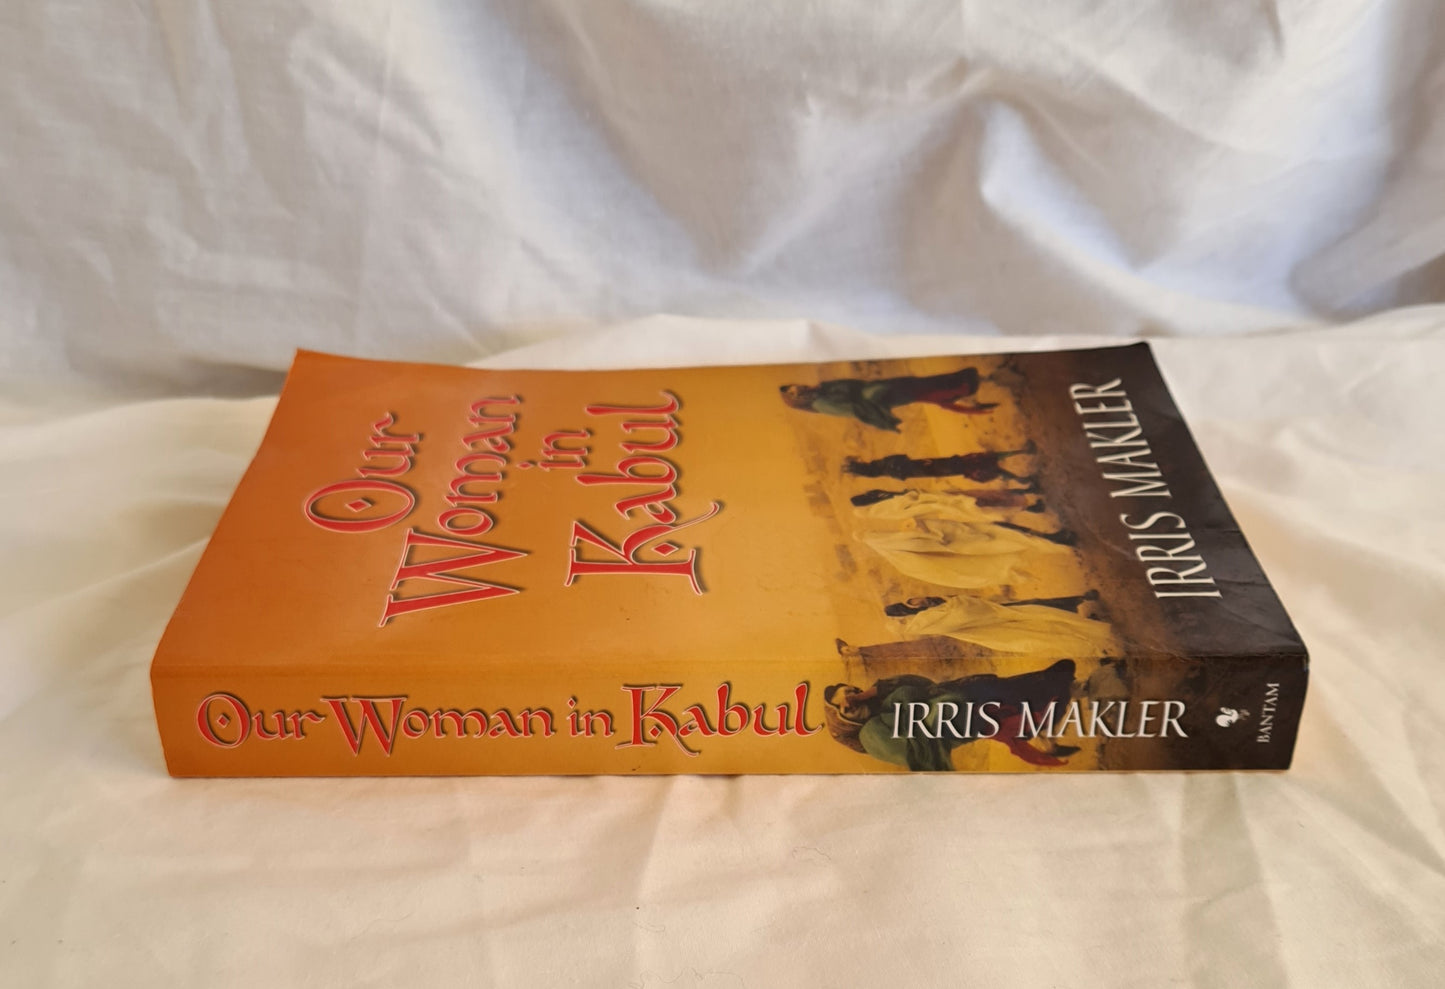 Our Woman in Kabul by Irris Makler